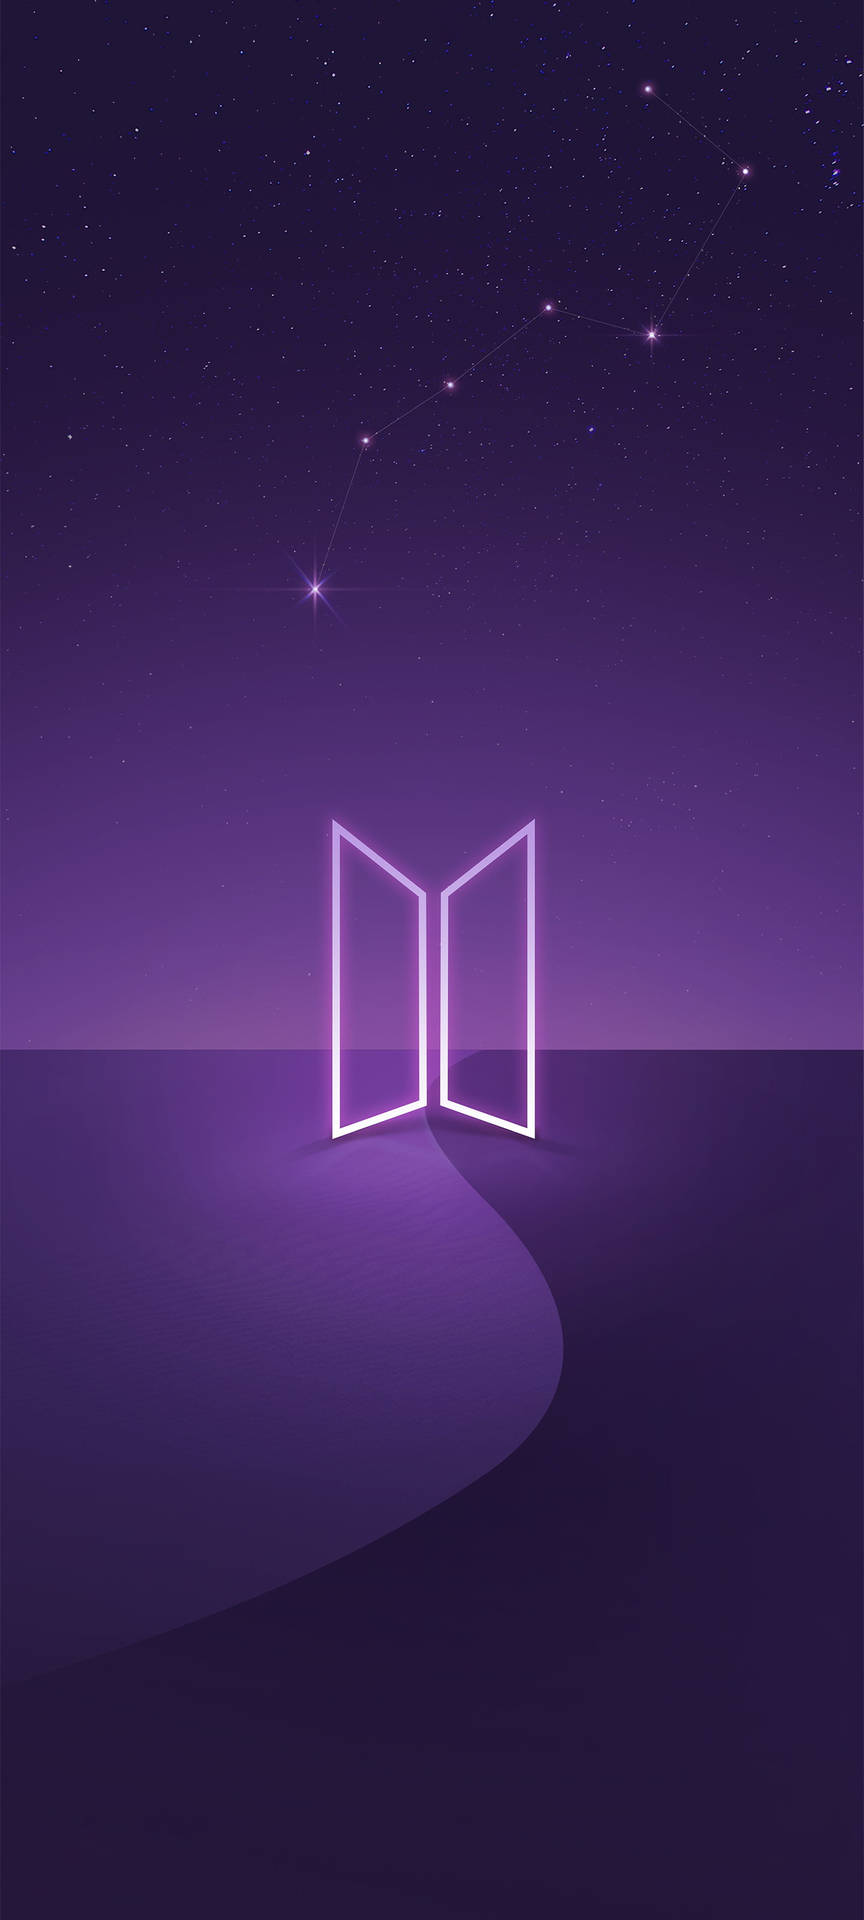 Bts Logo For Samsung S20 Fe Picture